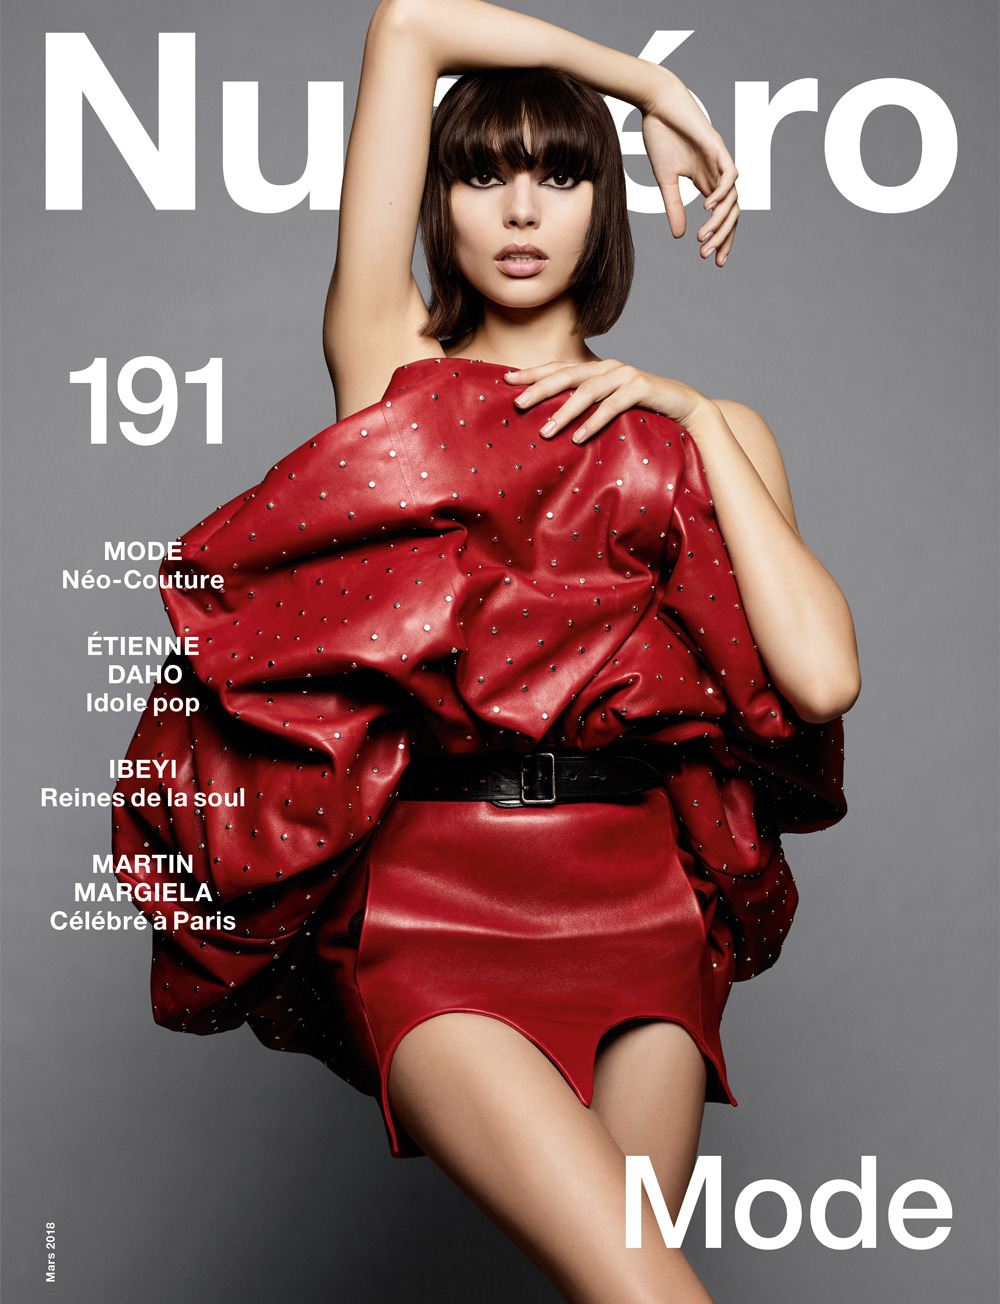 Numéro #191 March 2018 Cover Story Editorial